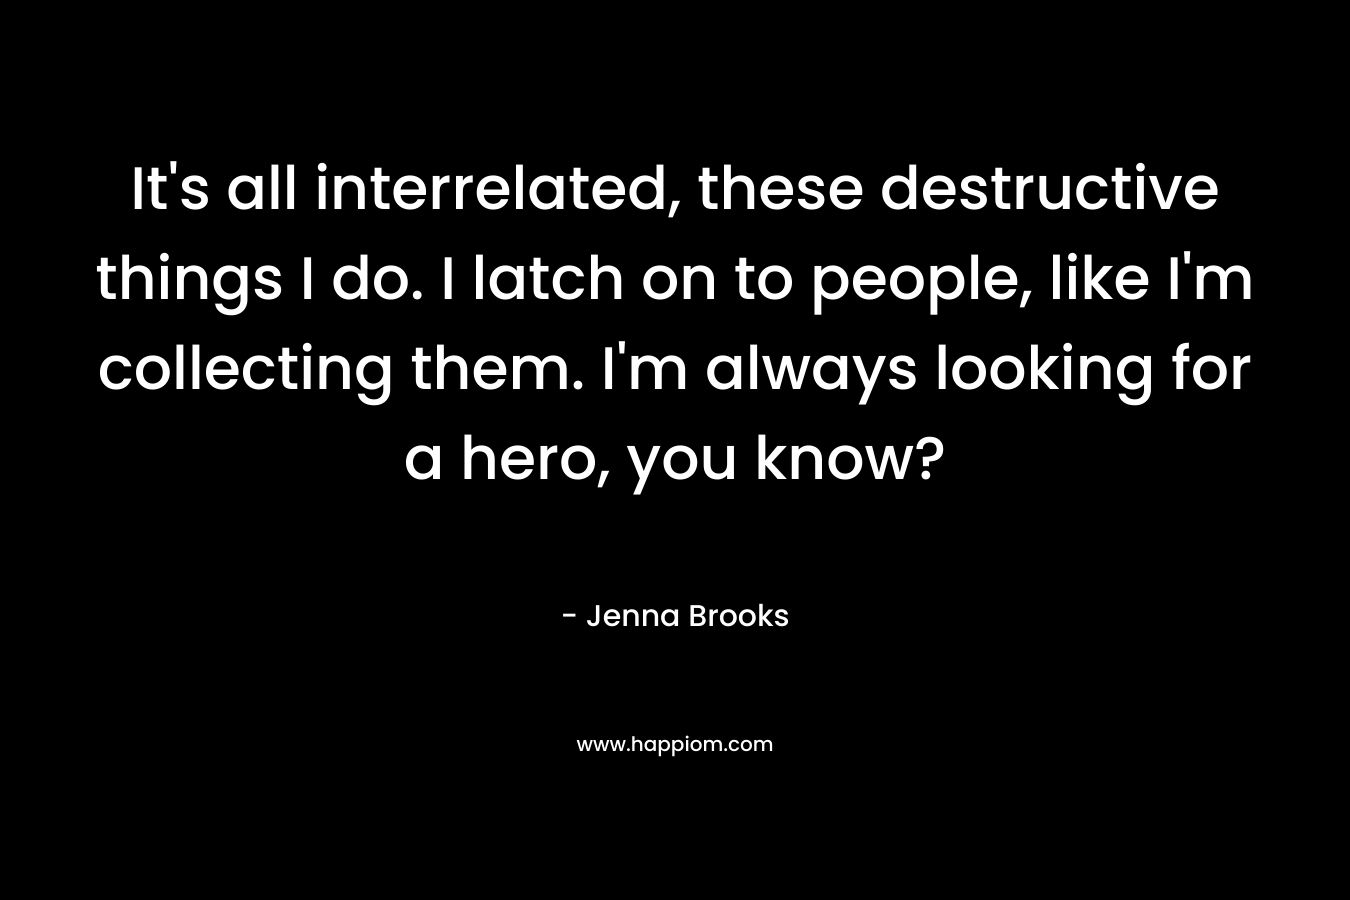 It’s all interrelated, these destructive things I do. I latch on to people, like I’m collecting them. I’m always looking for a hero, you know? – Jenna Brooks